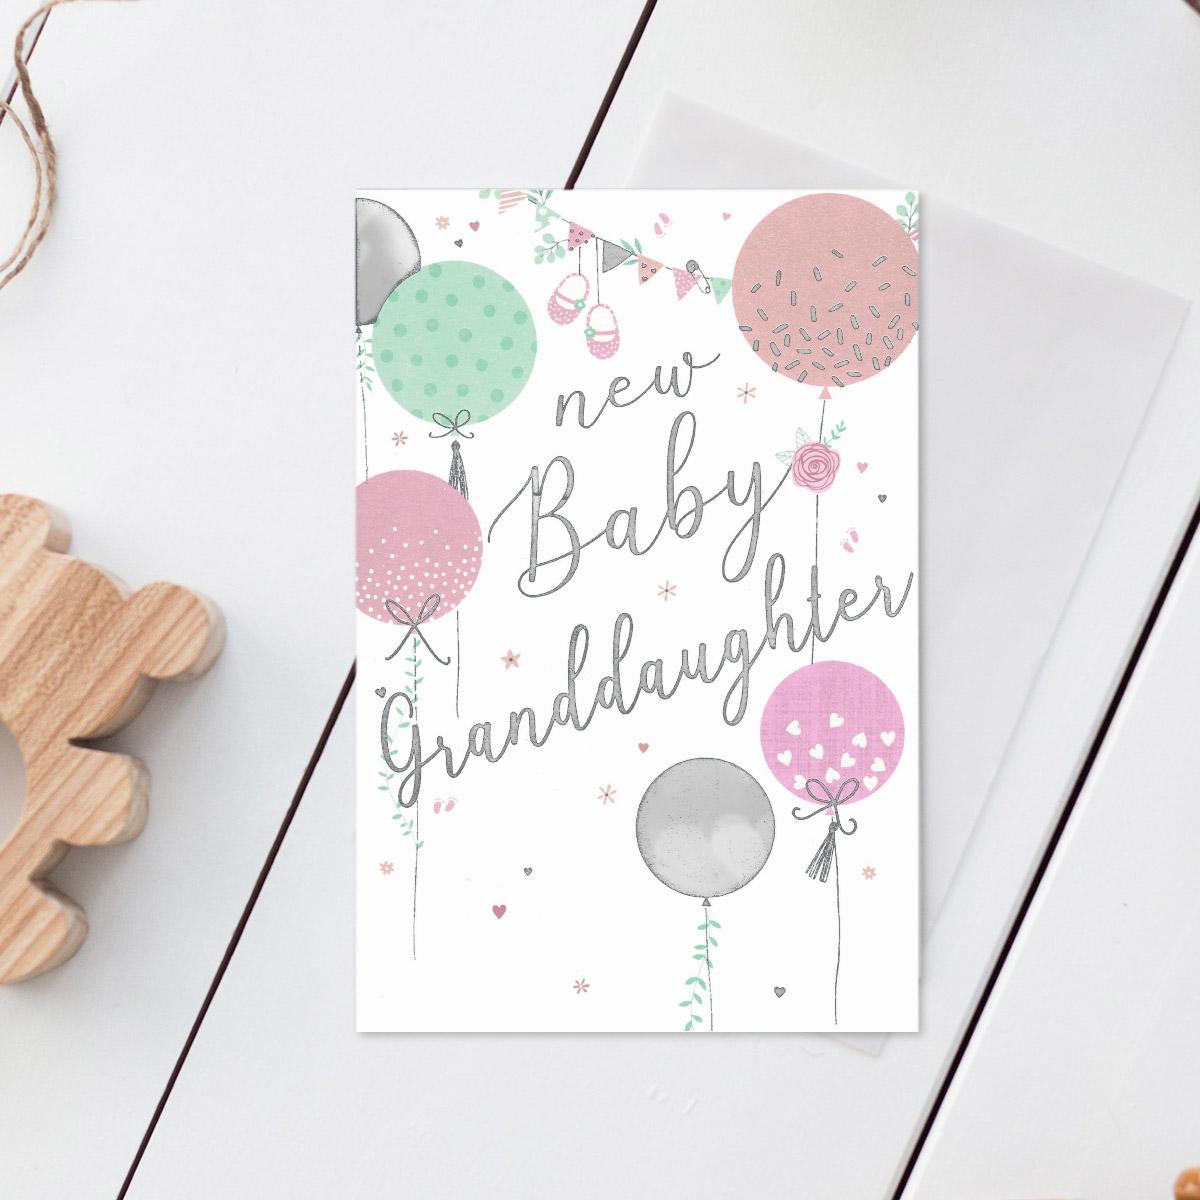 New Baby Granddaughter Card Front Image